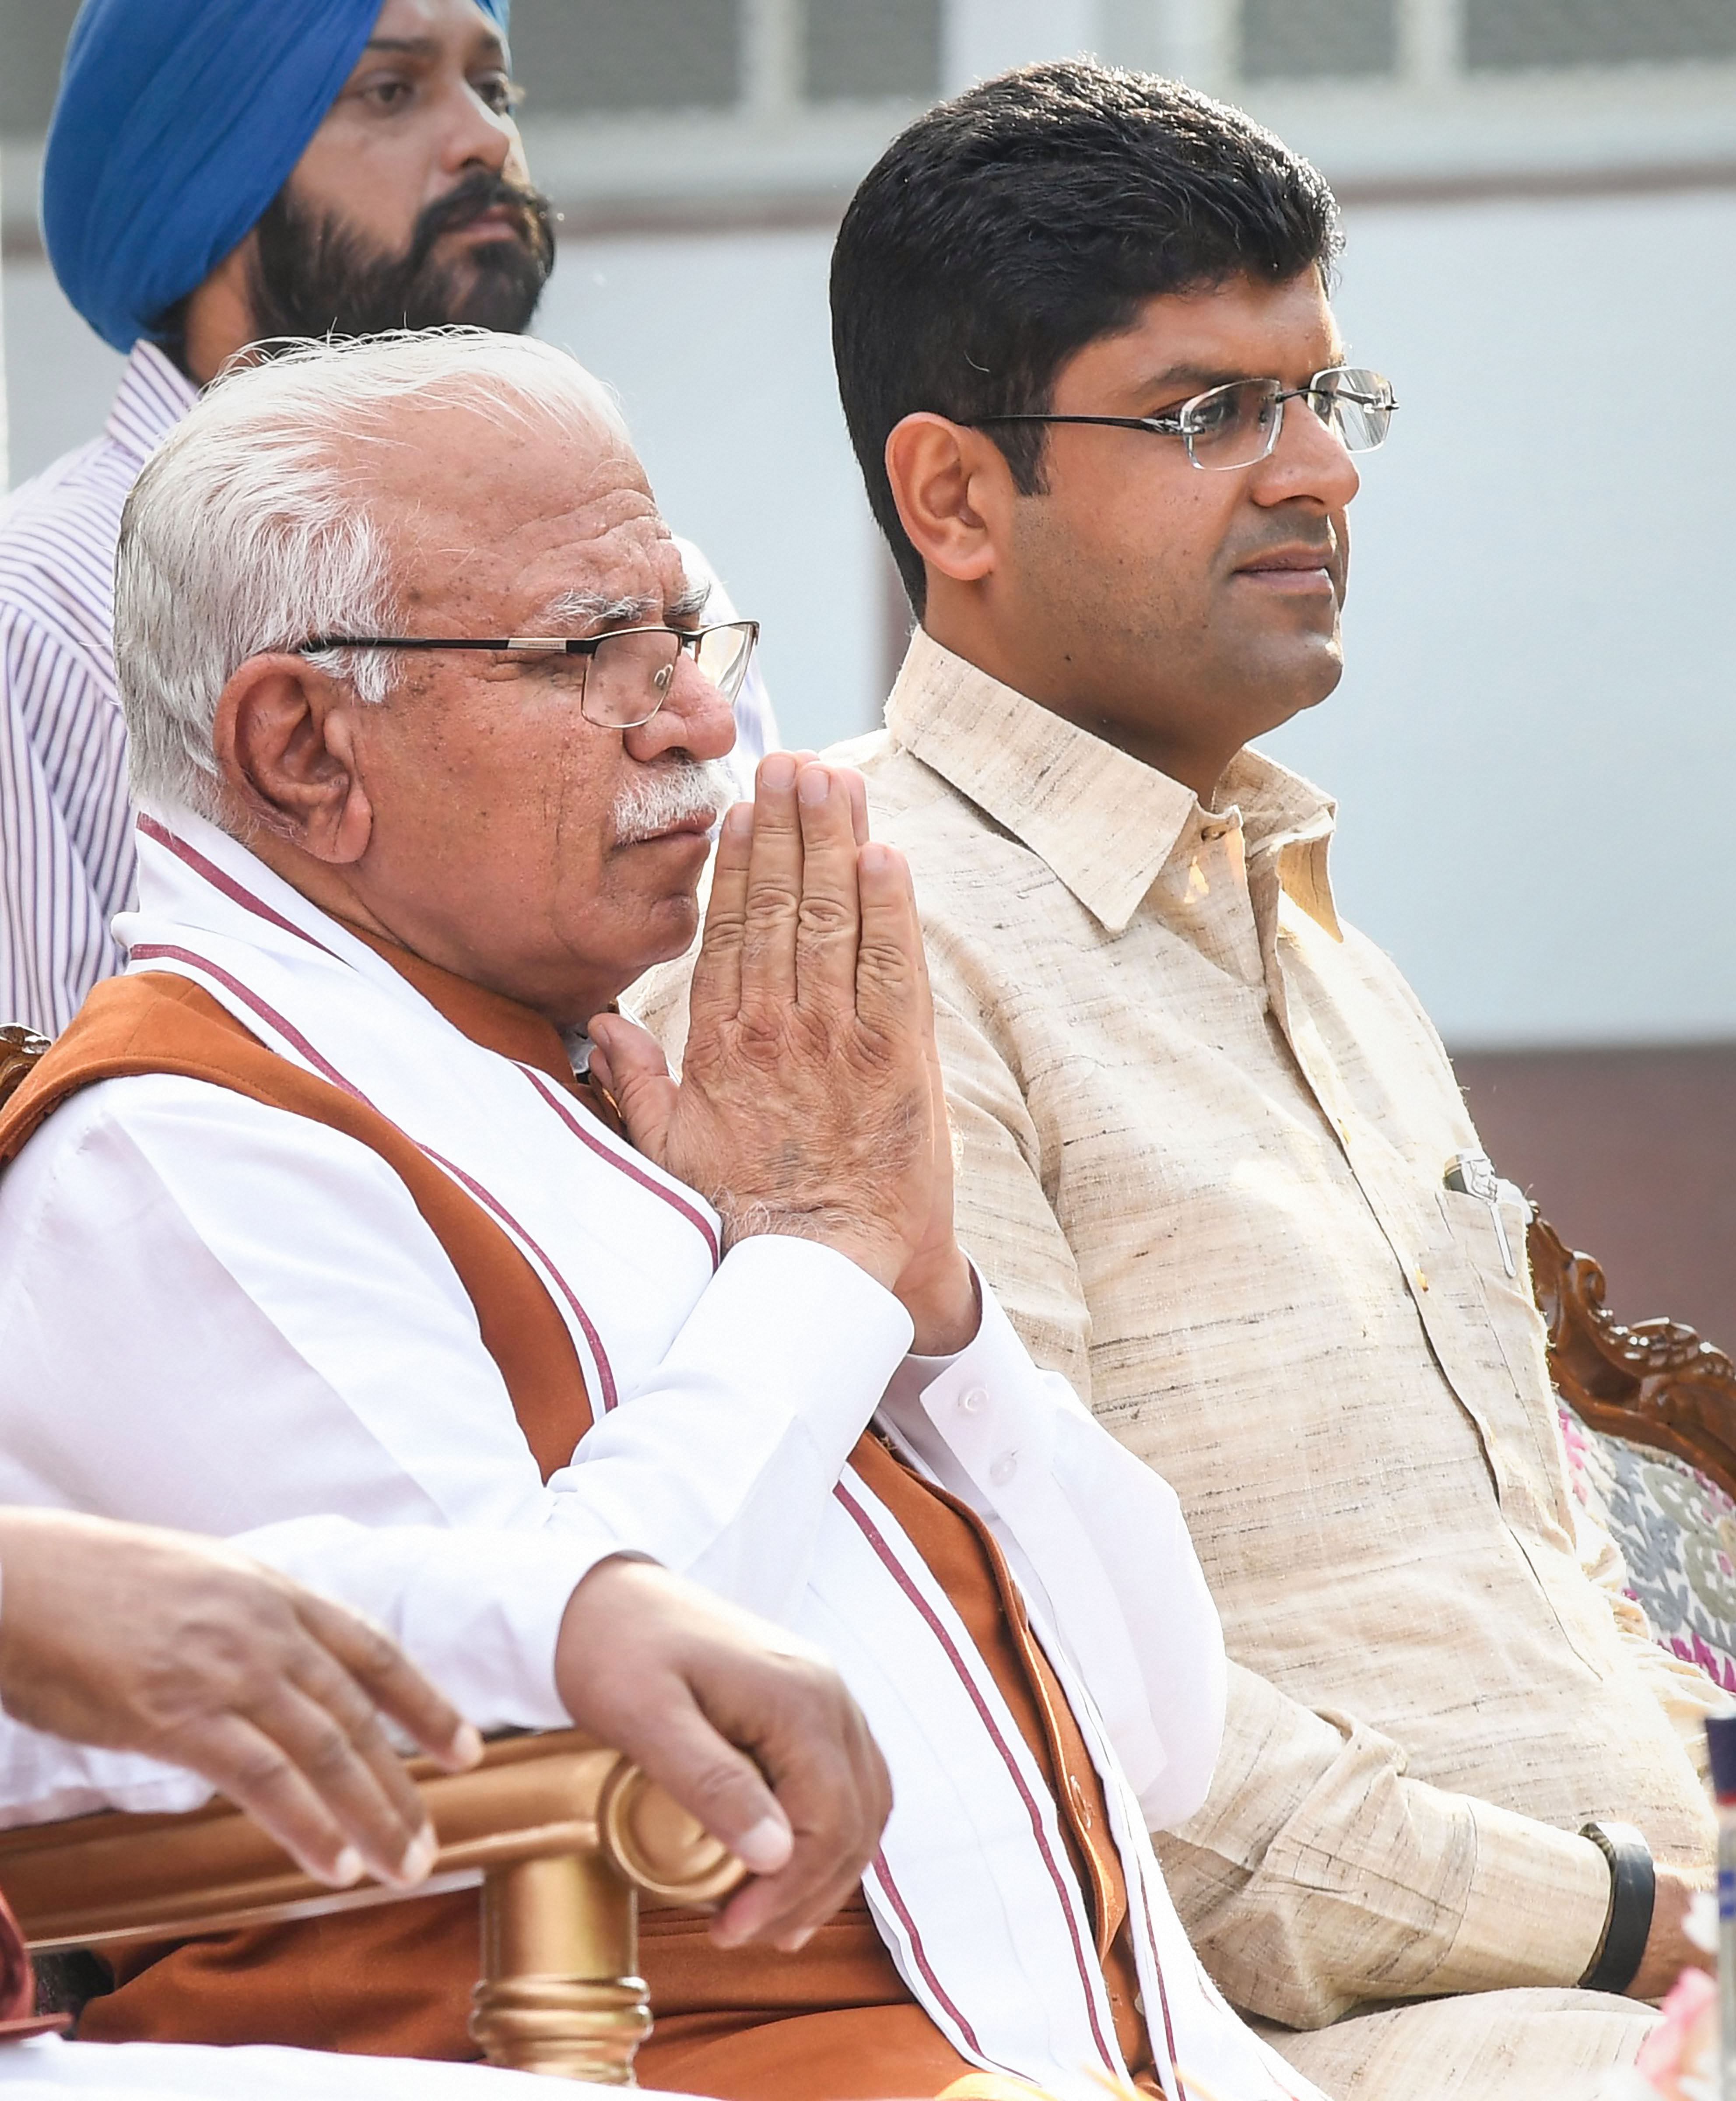 Haryana's new Chief Minister Manohar Lal Khattar and Deputy Chief Minister Dushyant Chautala after taking oath during a swearing-in ceremony, in Chandigarh. (PTI Photo)